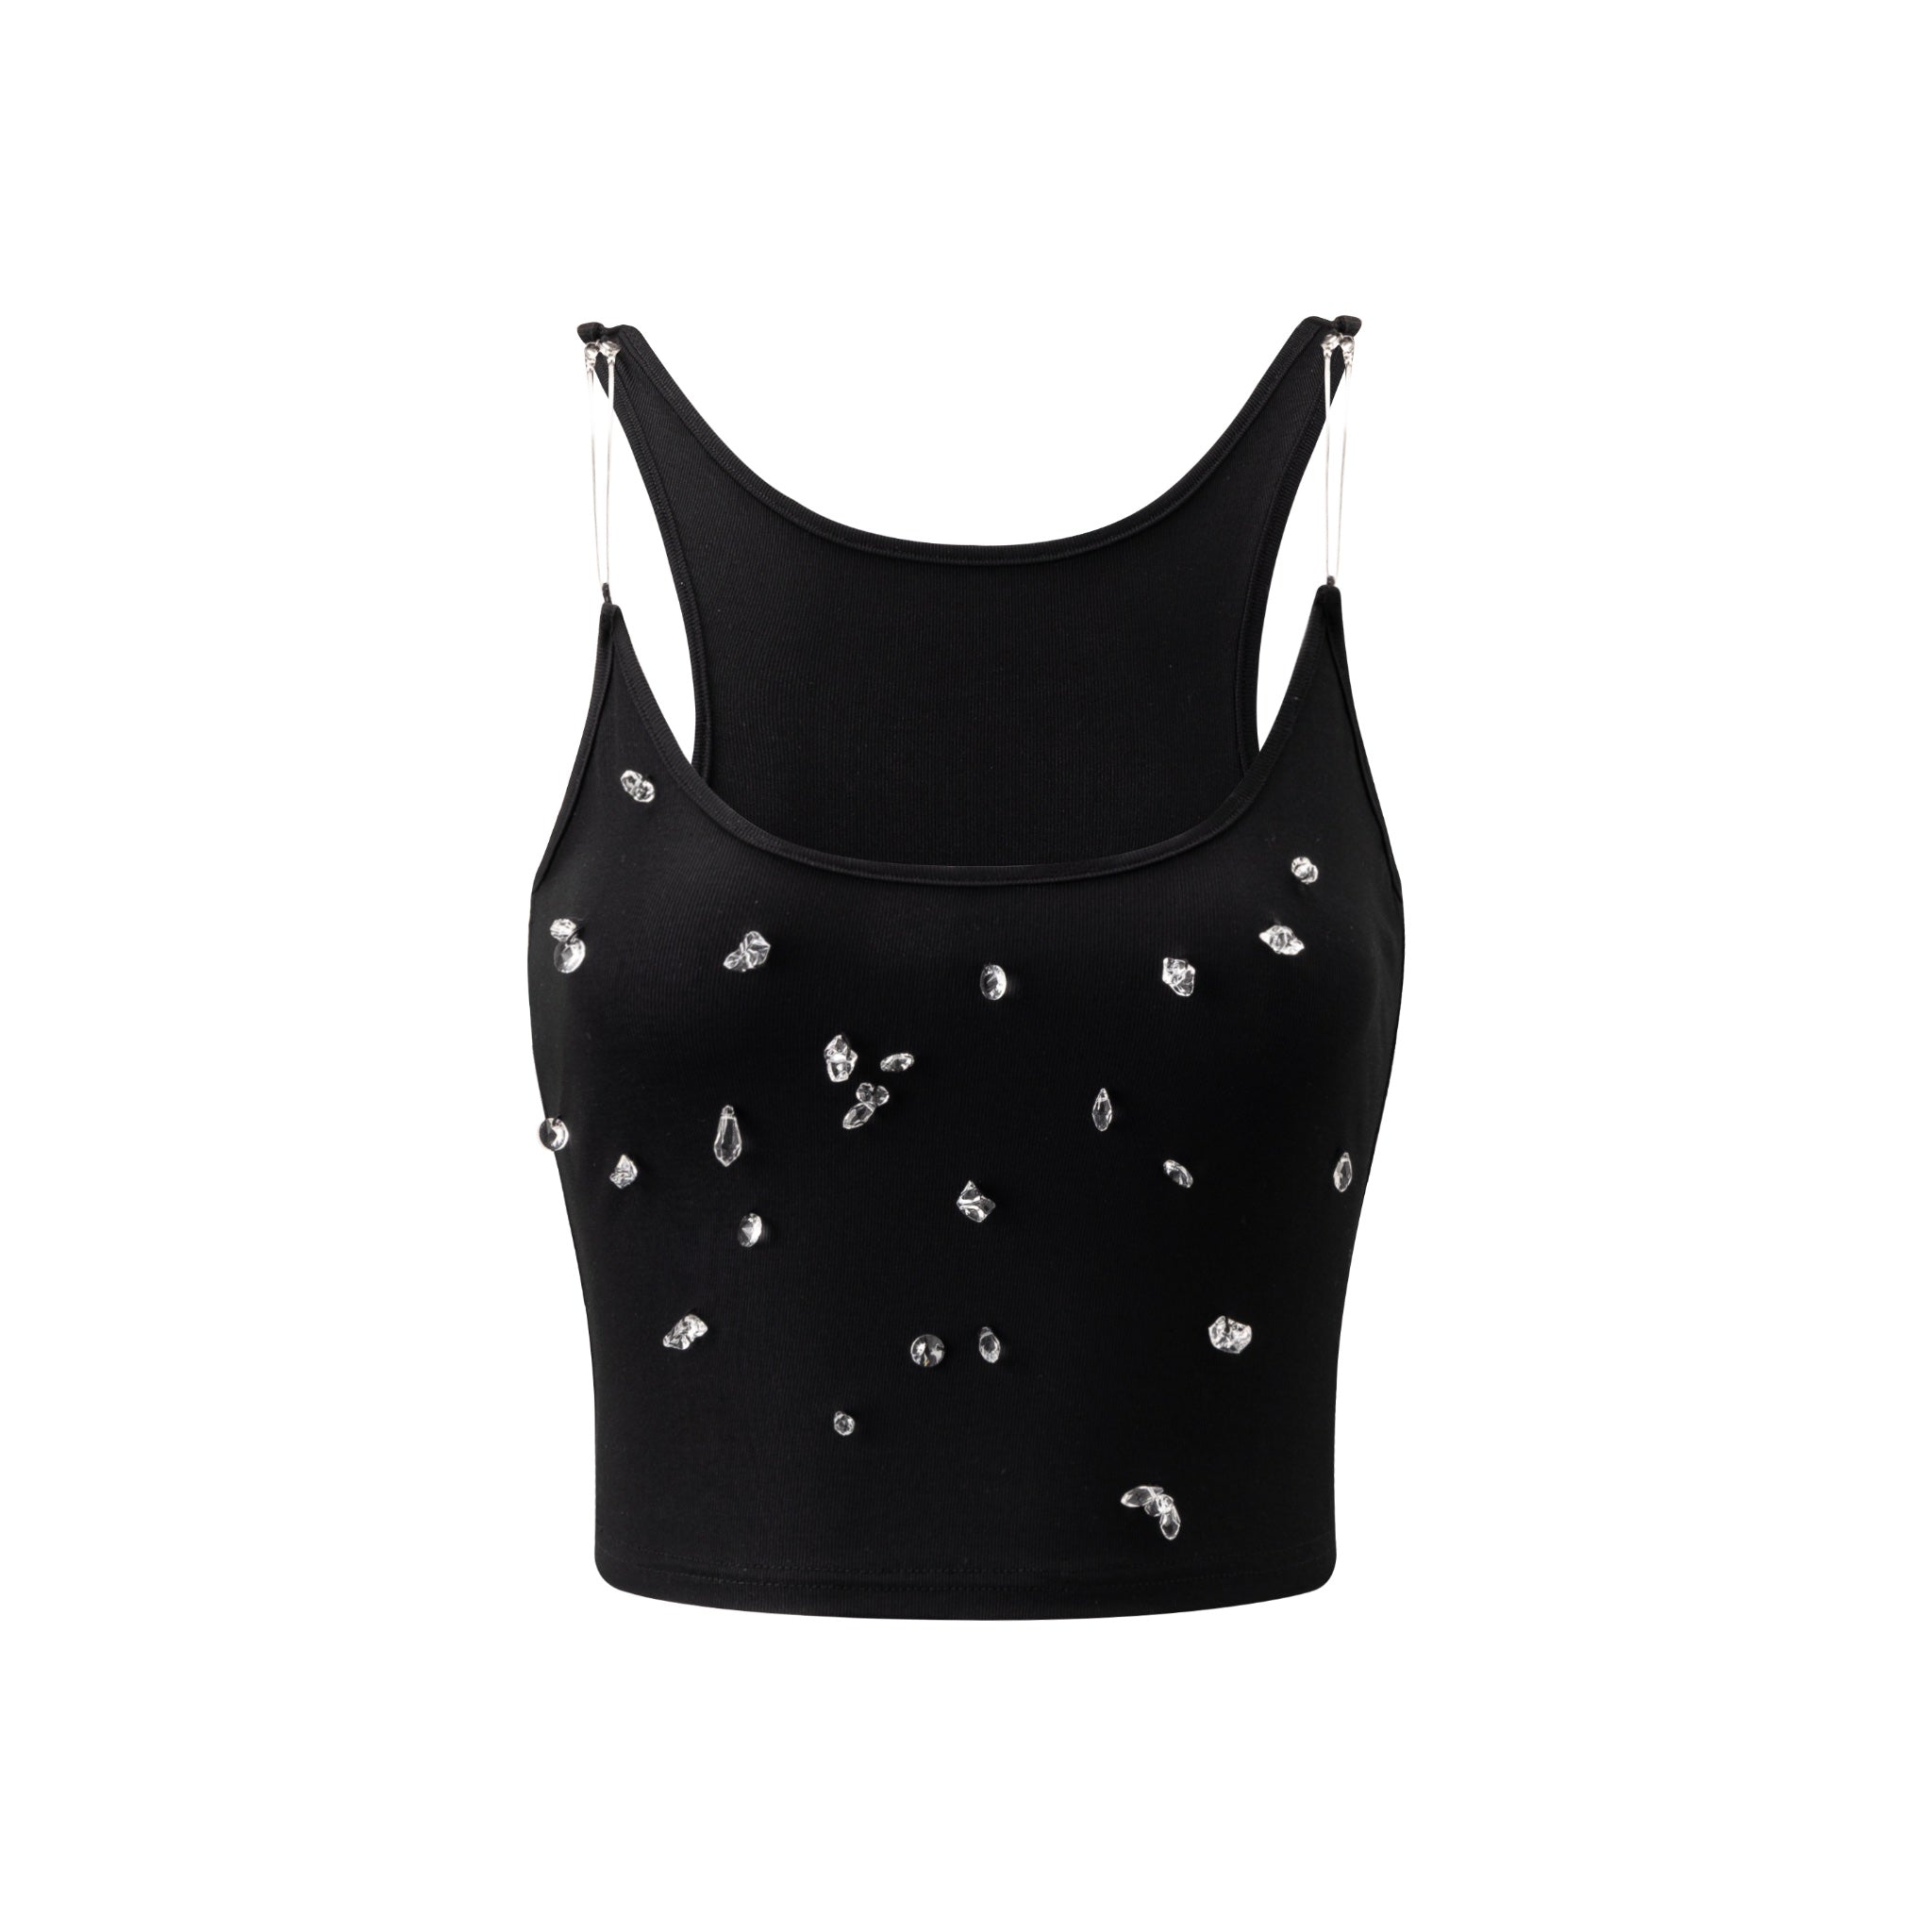 ONOFFON Black Knit Crystal Camisole Top | MADA IN CHINA